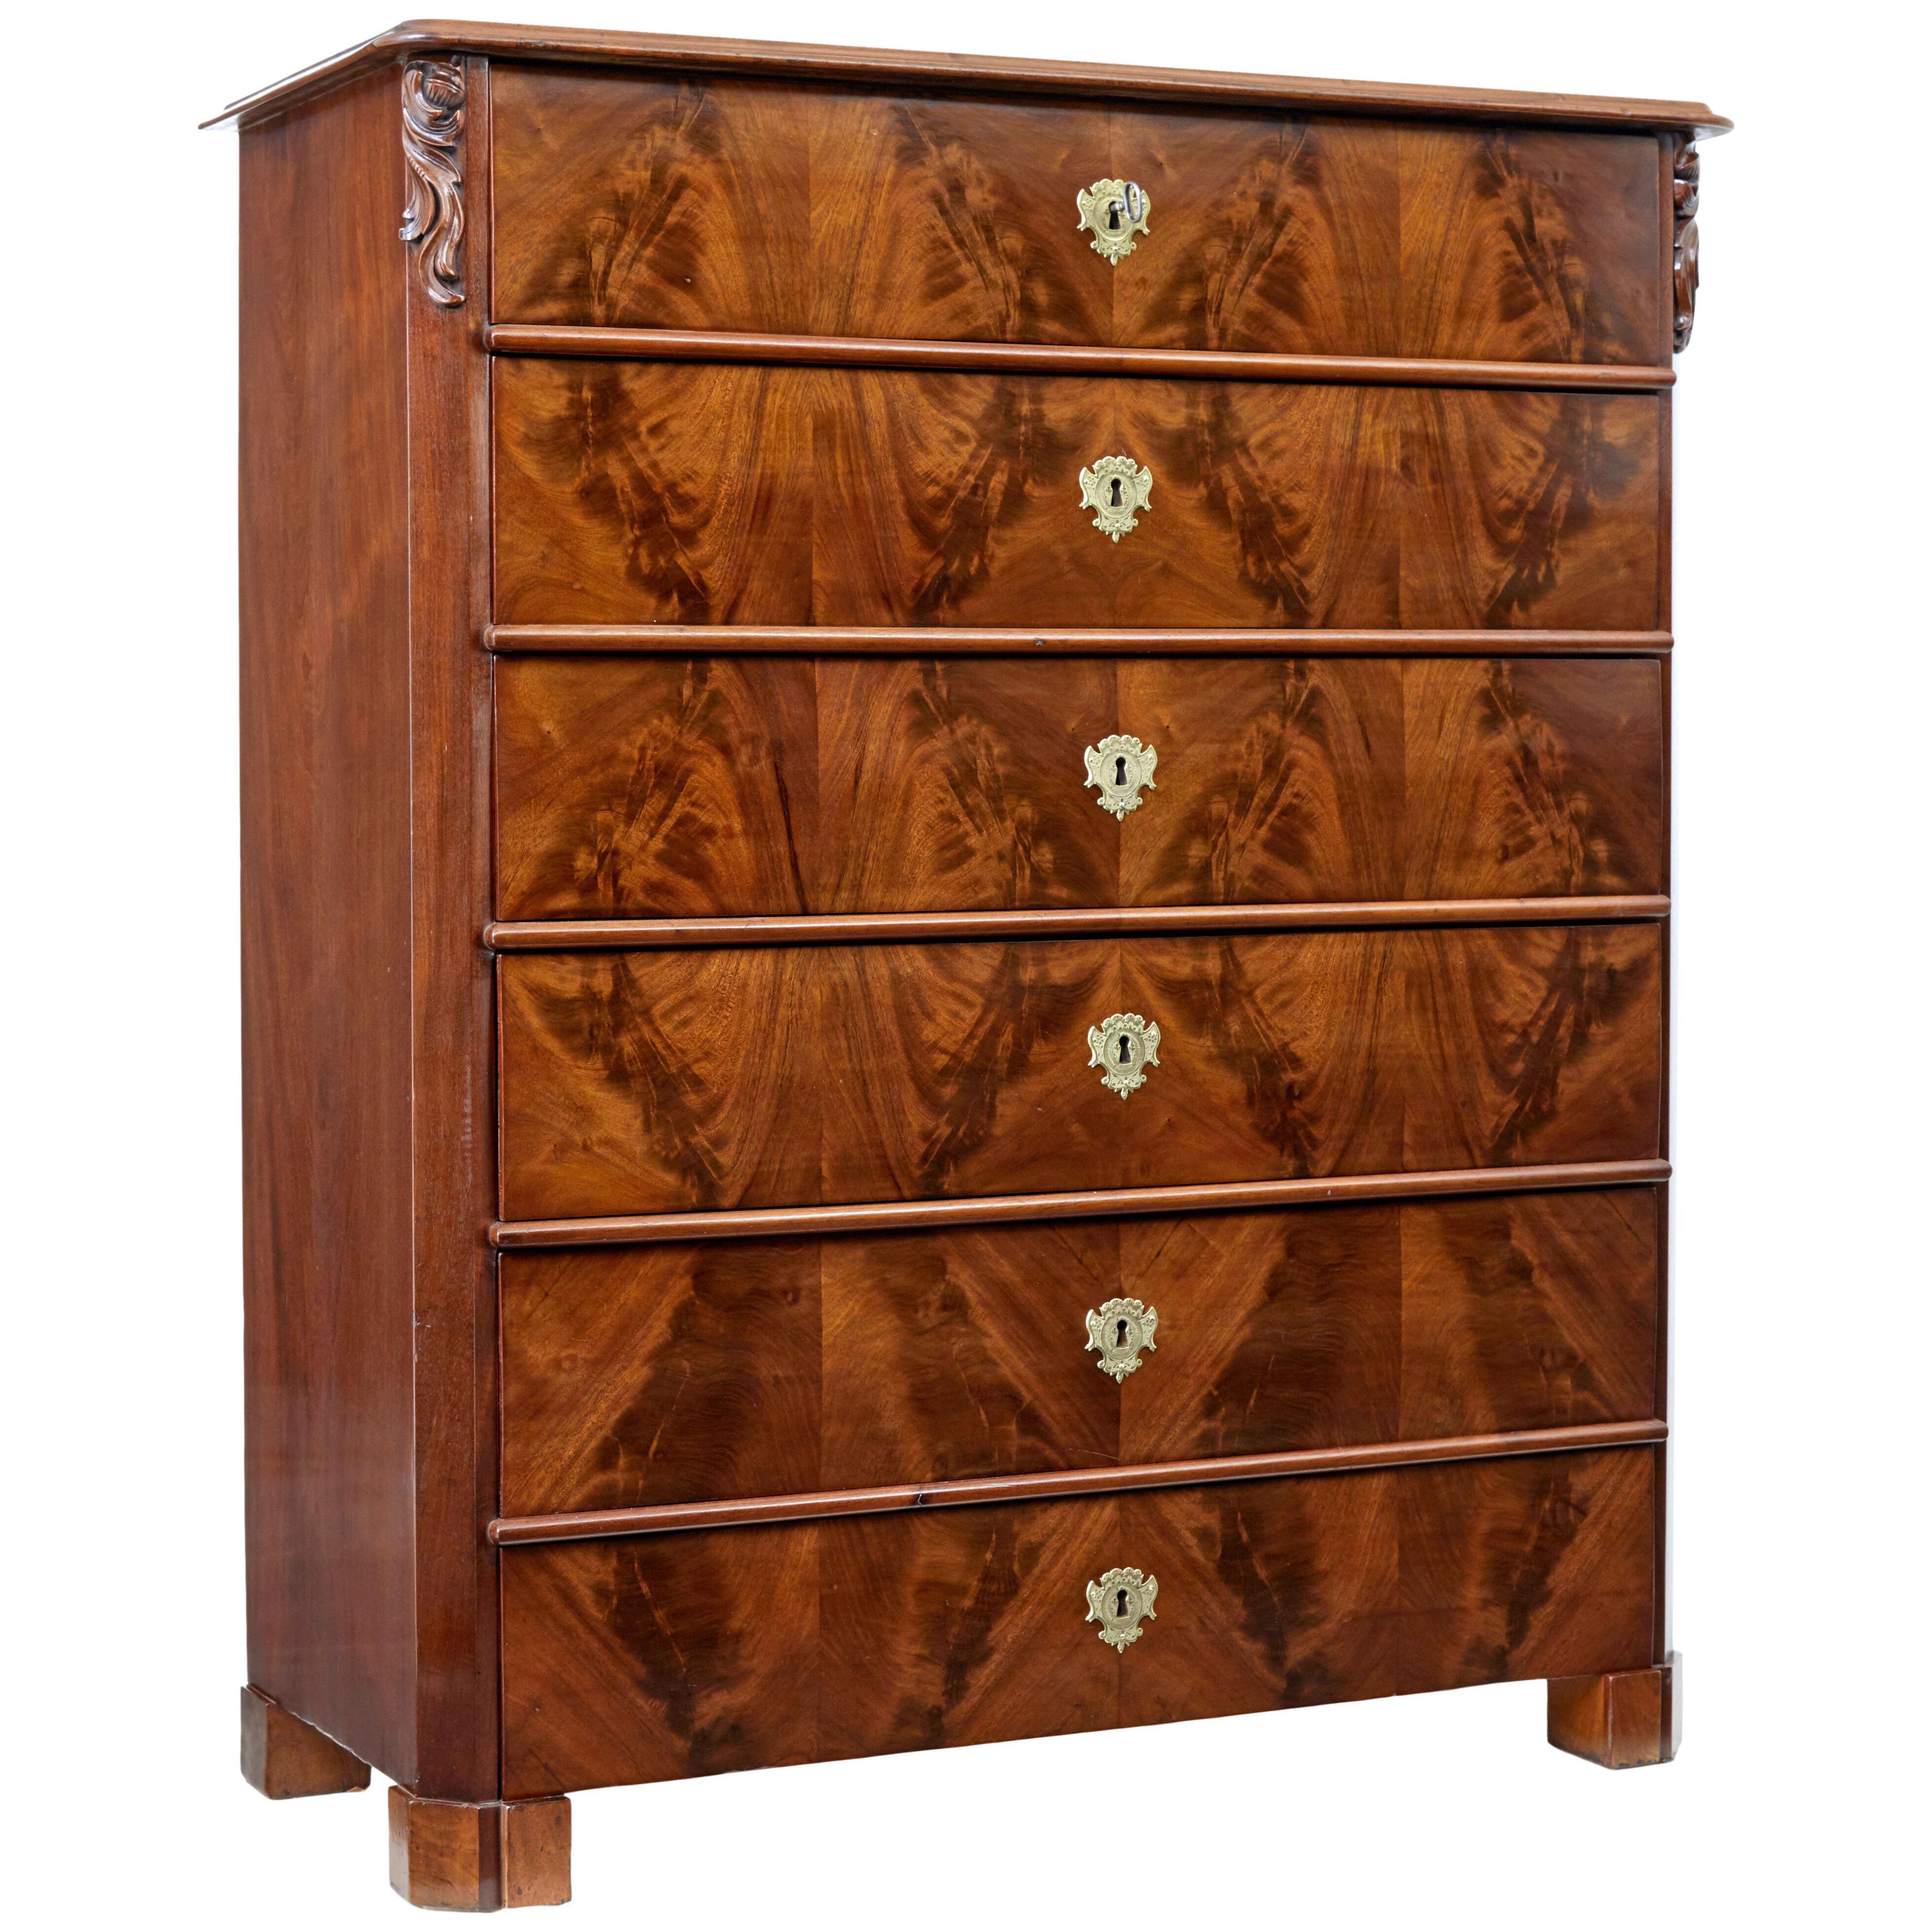 19TH CENTURY TALL BURR WALNUT CHEST OF DRAWERS